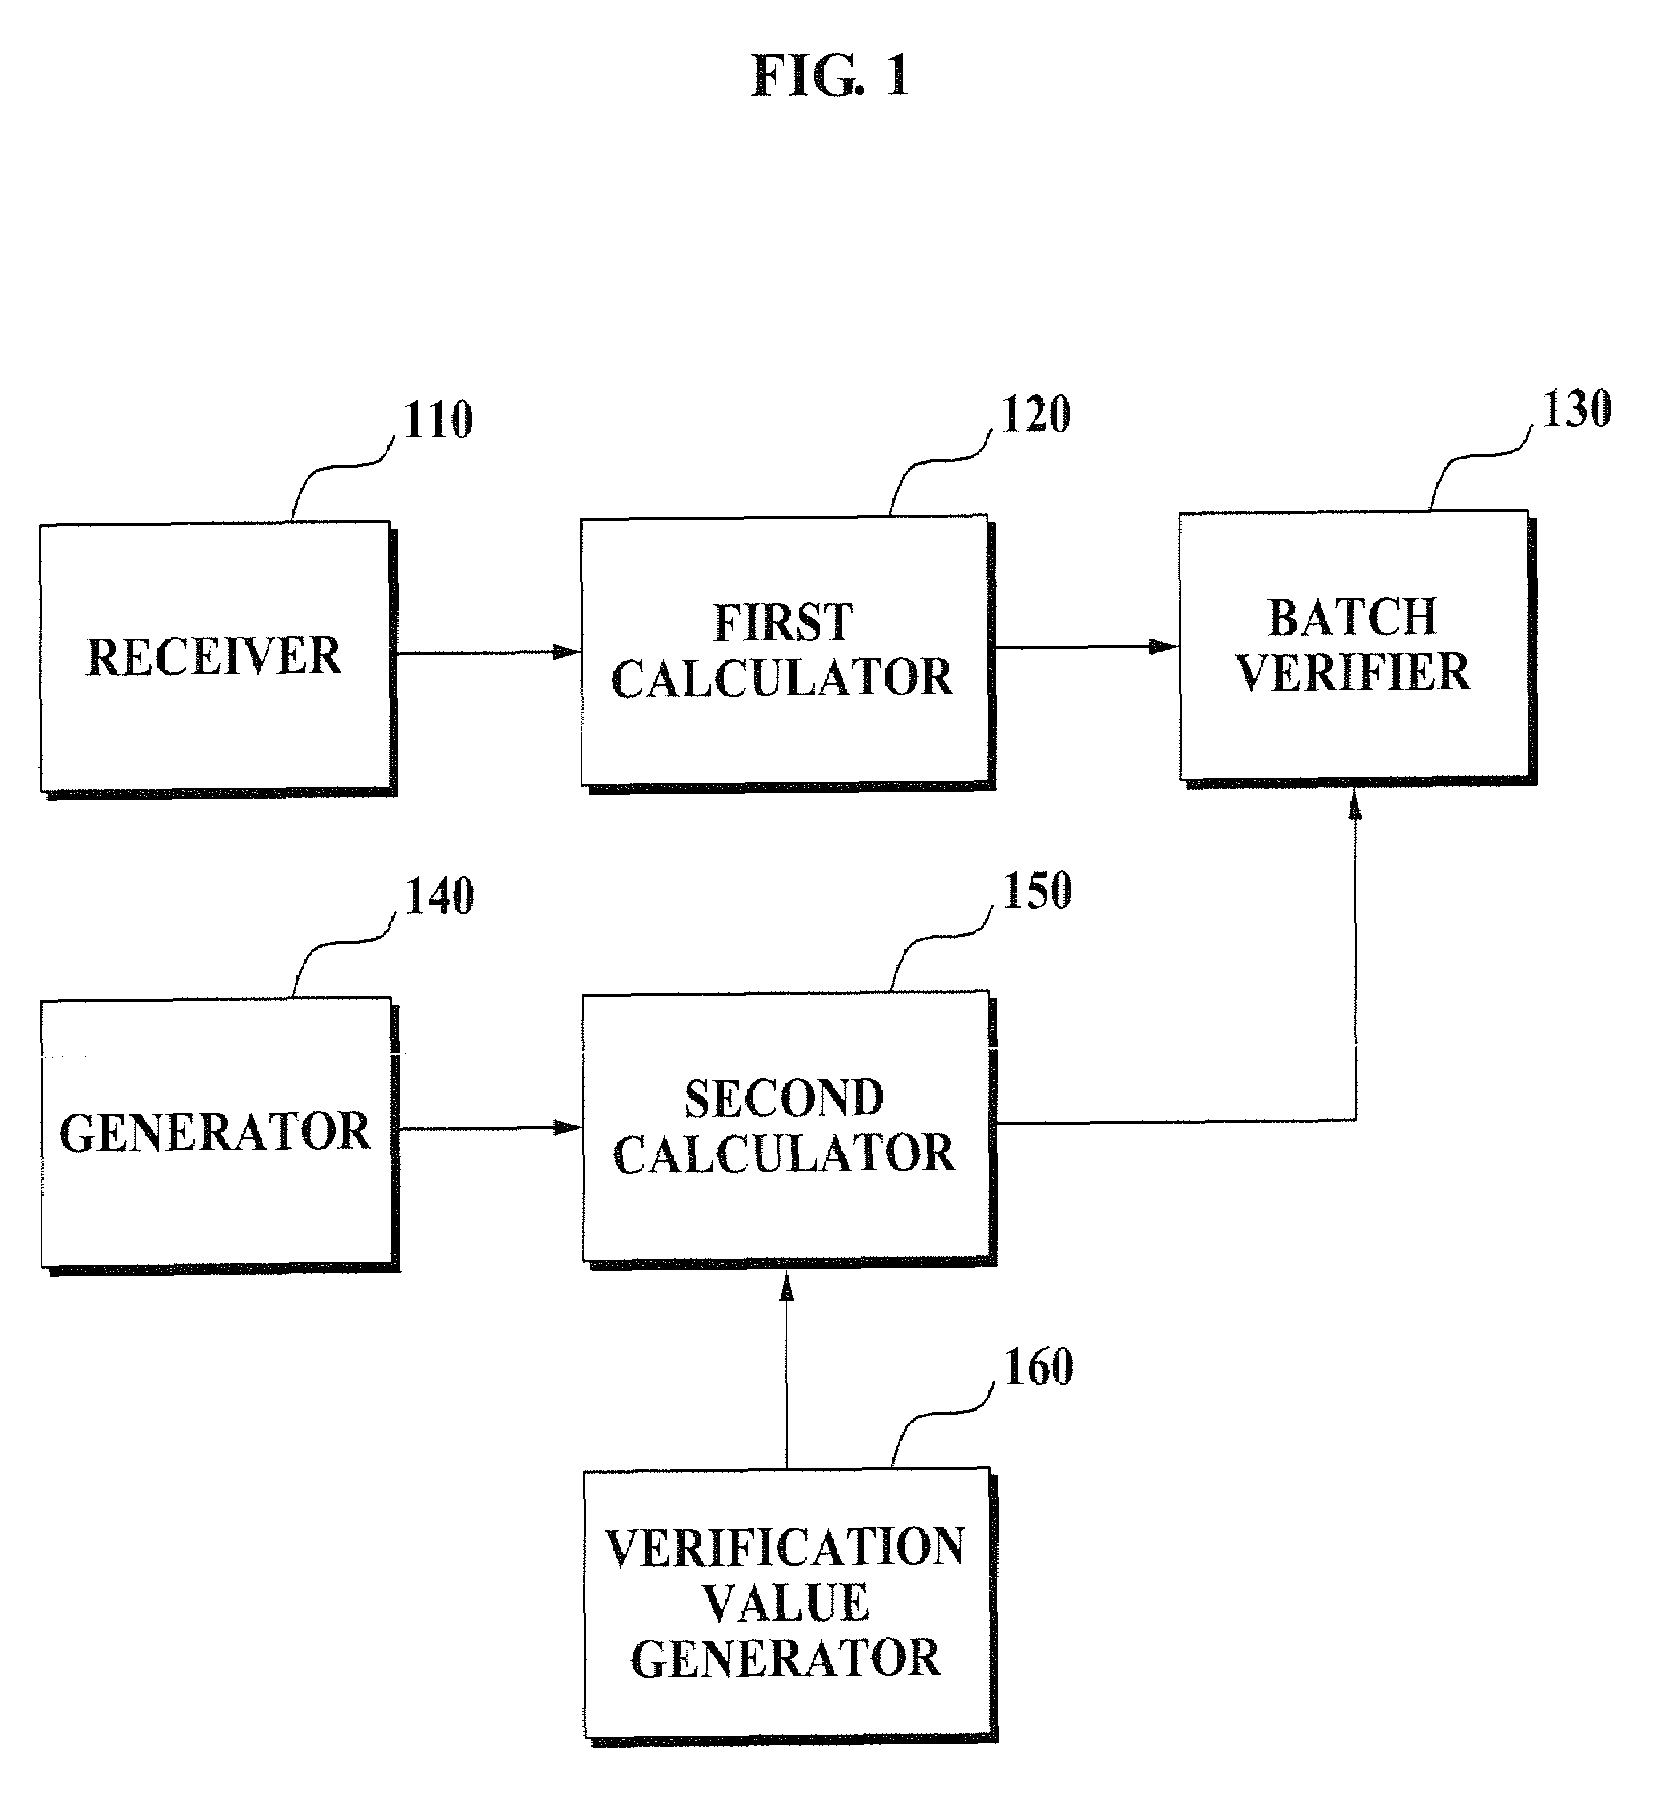 Apparatus for batch verification and method using the same